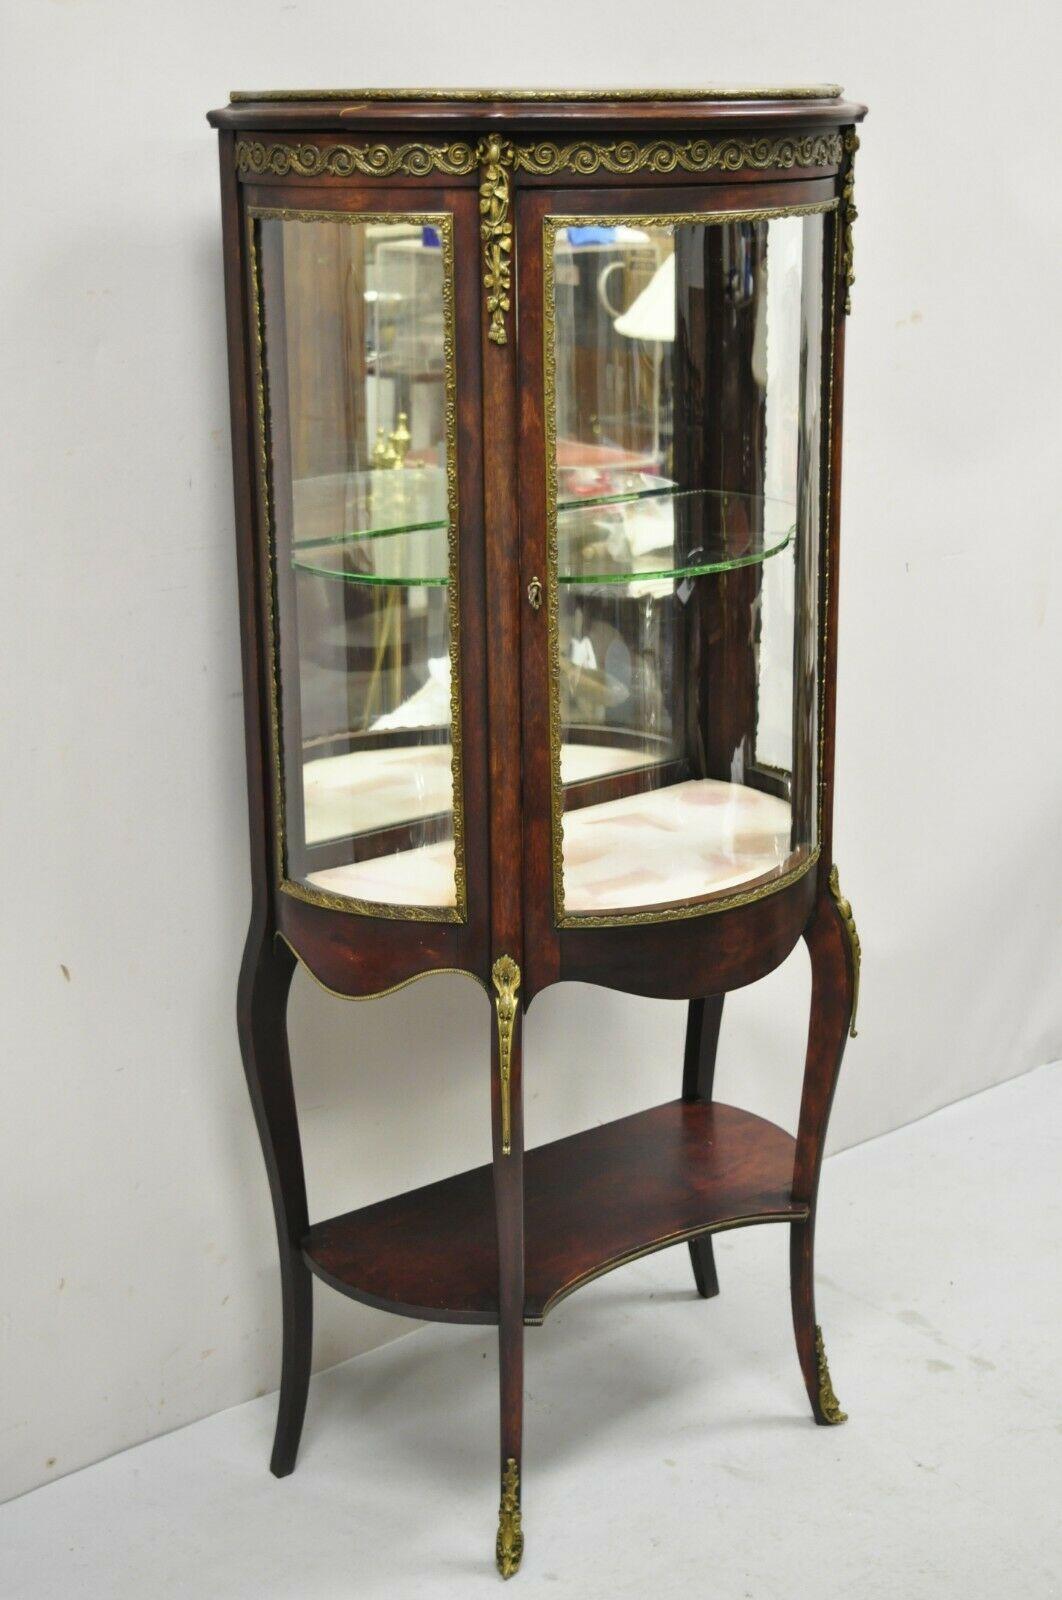 Antique French Louis XV Victorian Mahogany Bowed Glass Curio Vitrine Display Cabinet. Item features a curved bow front glass door and sides, bronze ormolu, lower shelf, 1 glass shelf, cabriole legs, very nice antique item, quality French